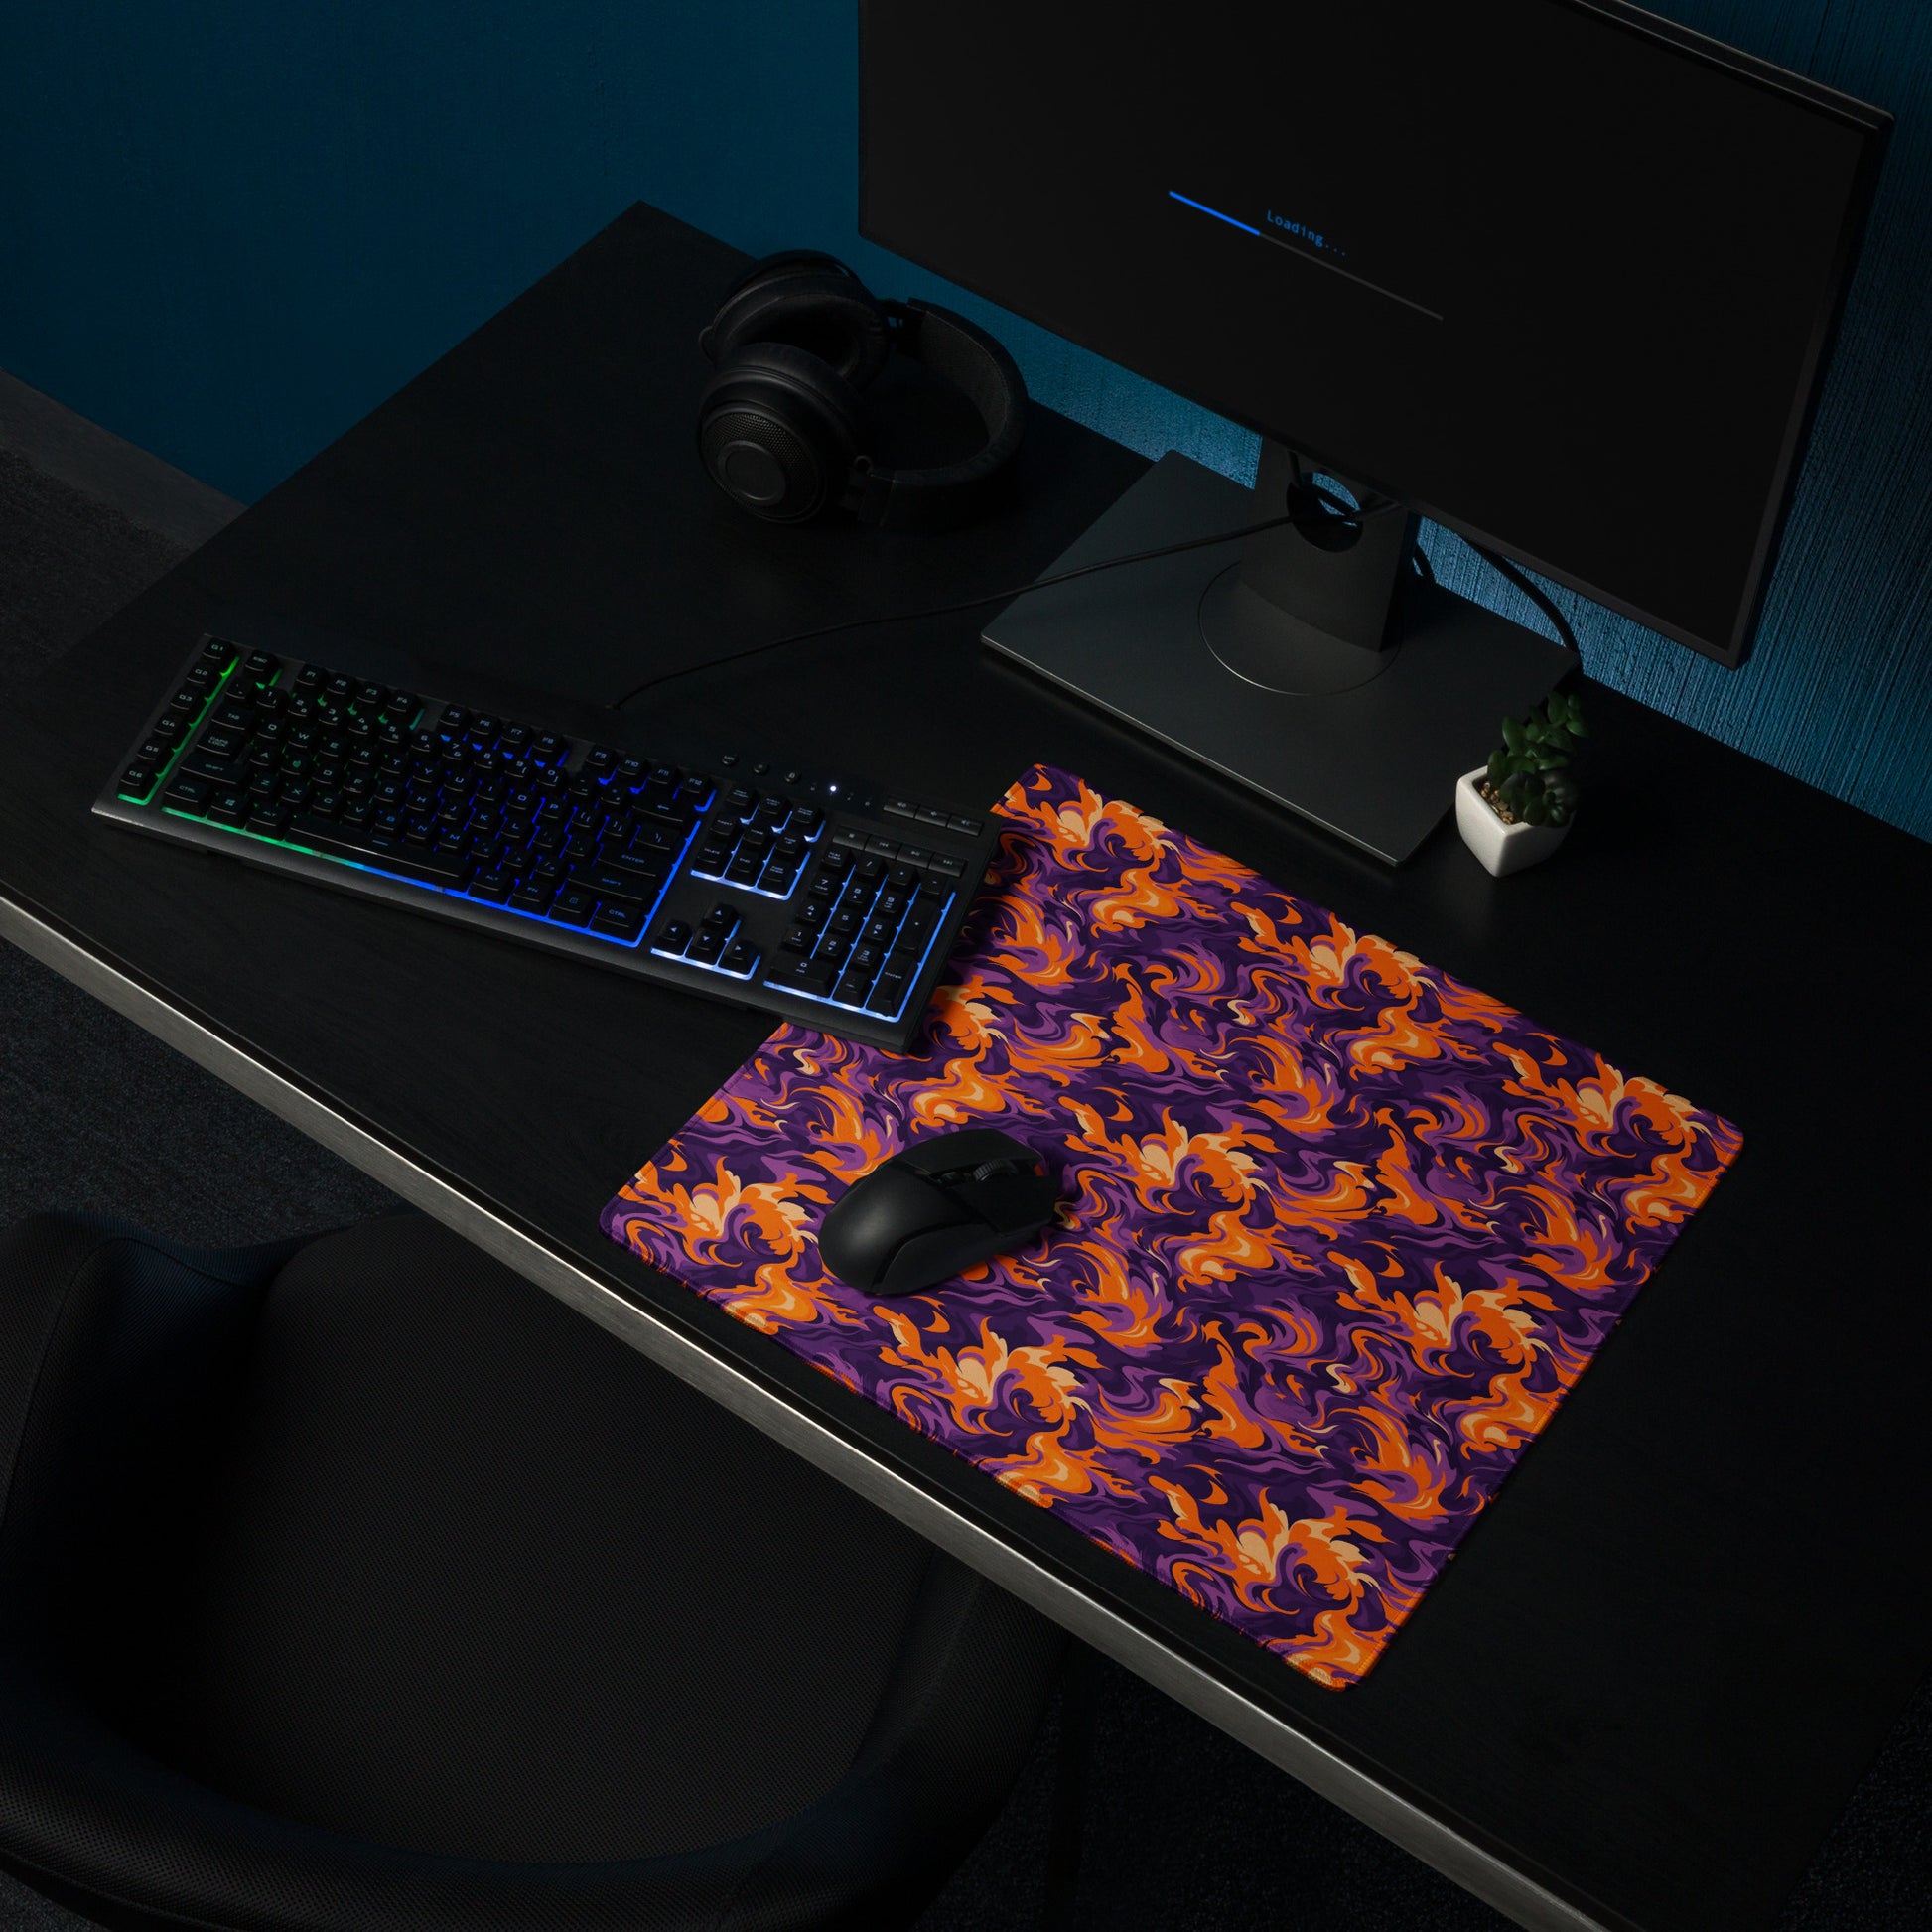 A 18" x 16" desk pad with a purple and orange camo pattern sitting on a desk.